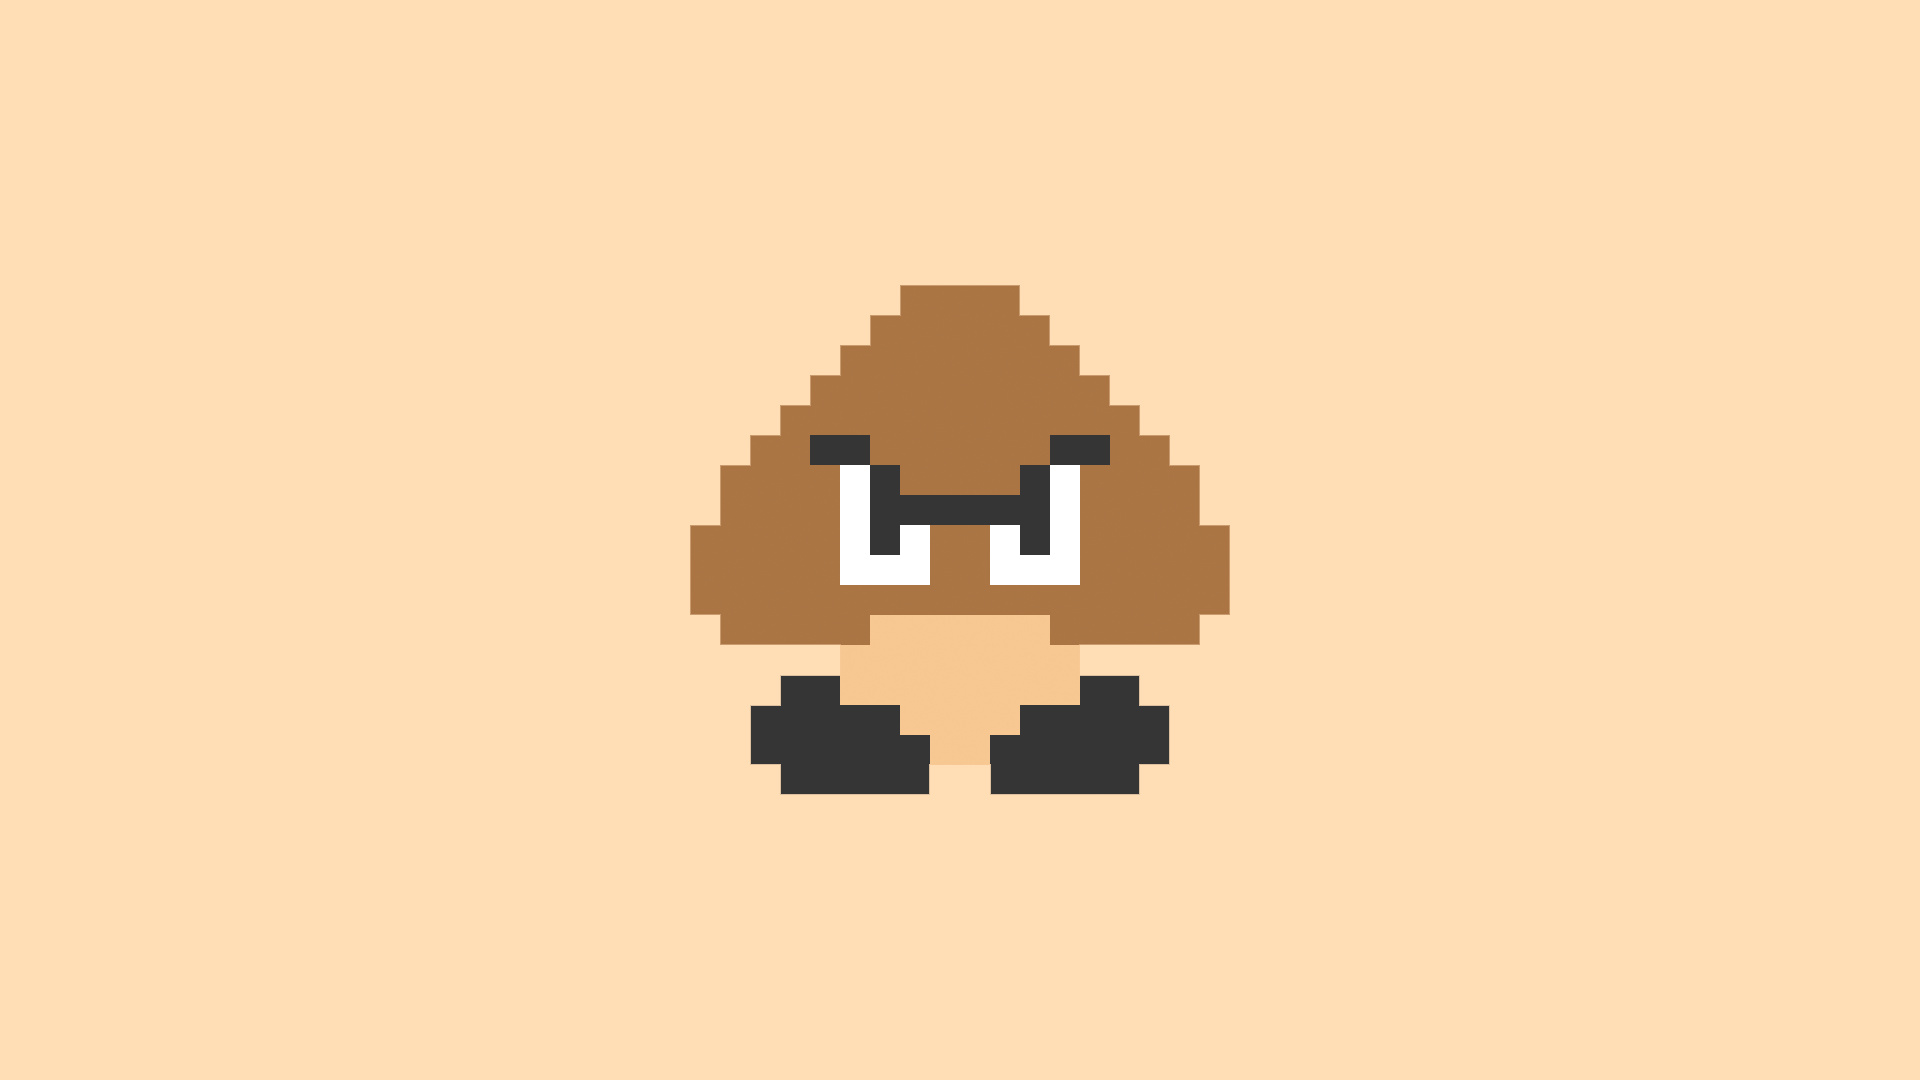 Goomba: Super Mario pixel character with two feet and no visible arms or legs, Animation. 1920x1080 Full HD Background.